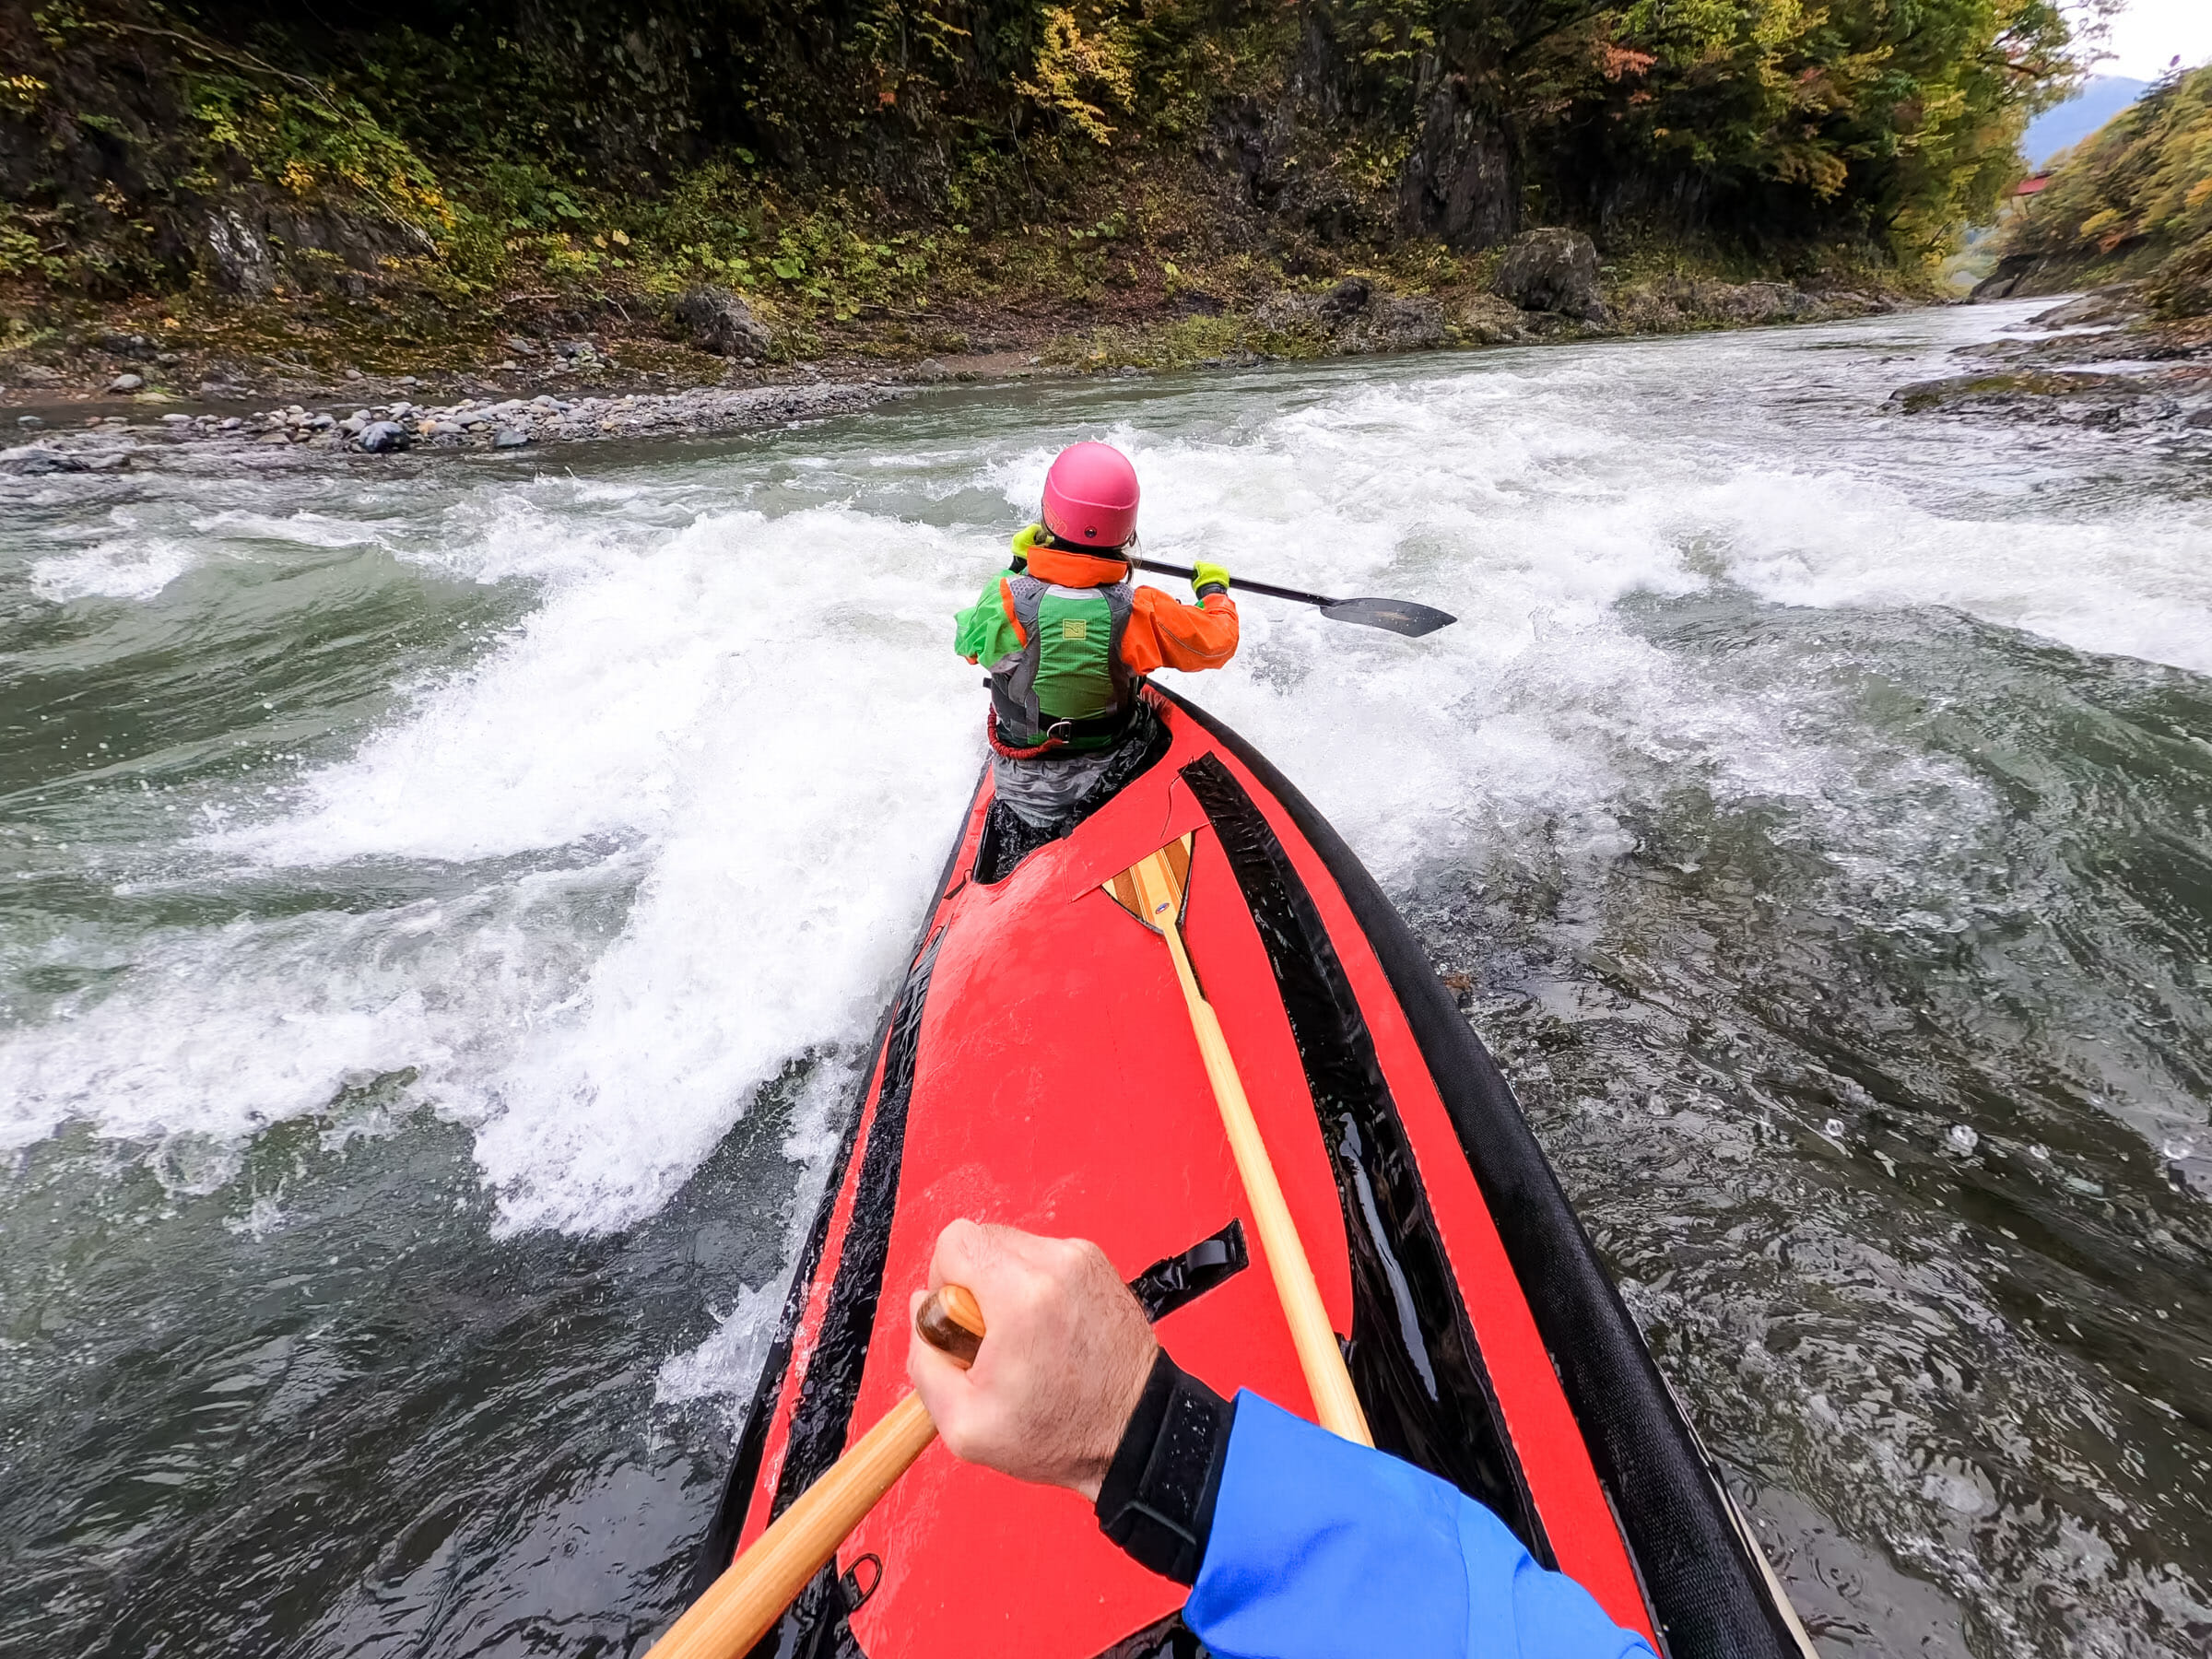 Entering the World of Wood: A Review of Shade Tree's Custom Bent Shaft  Kayak Paddle - Paddling Life